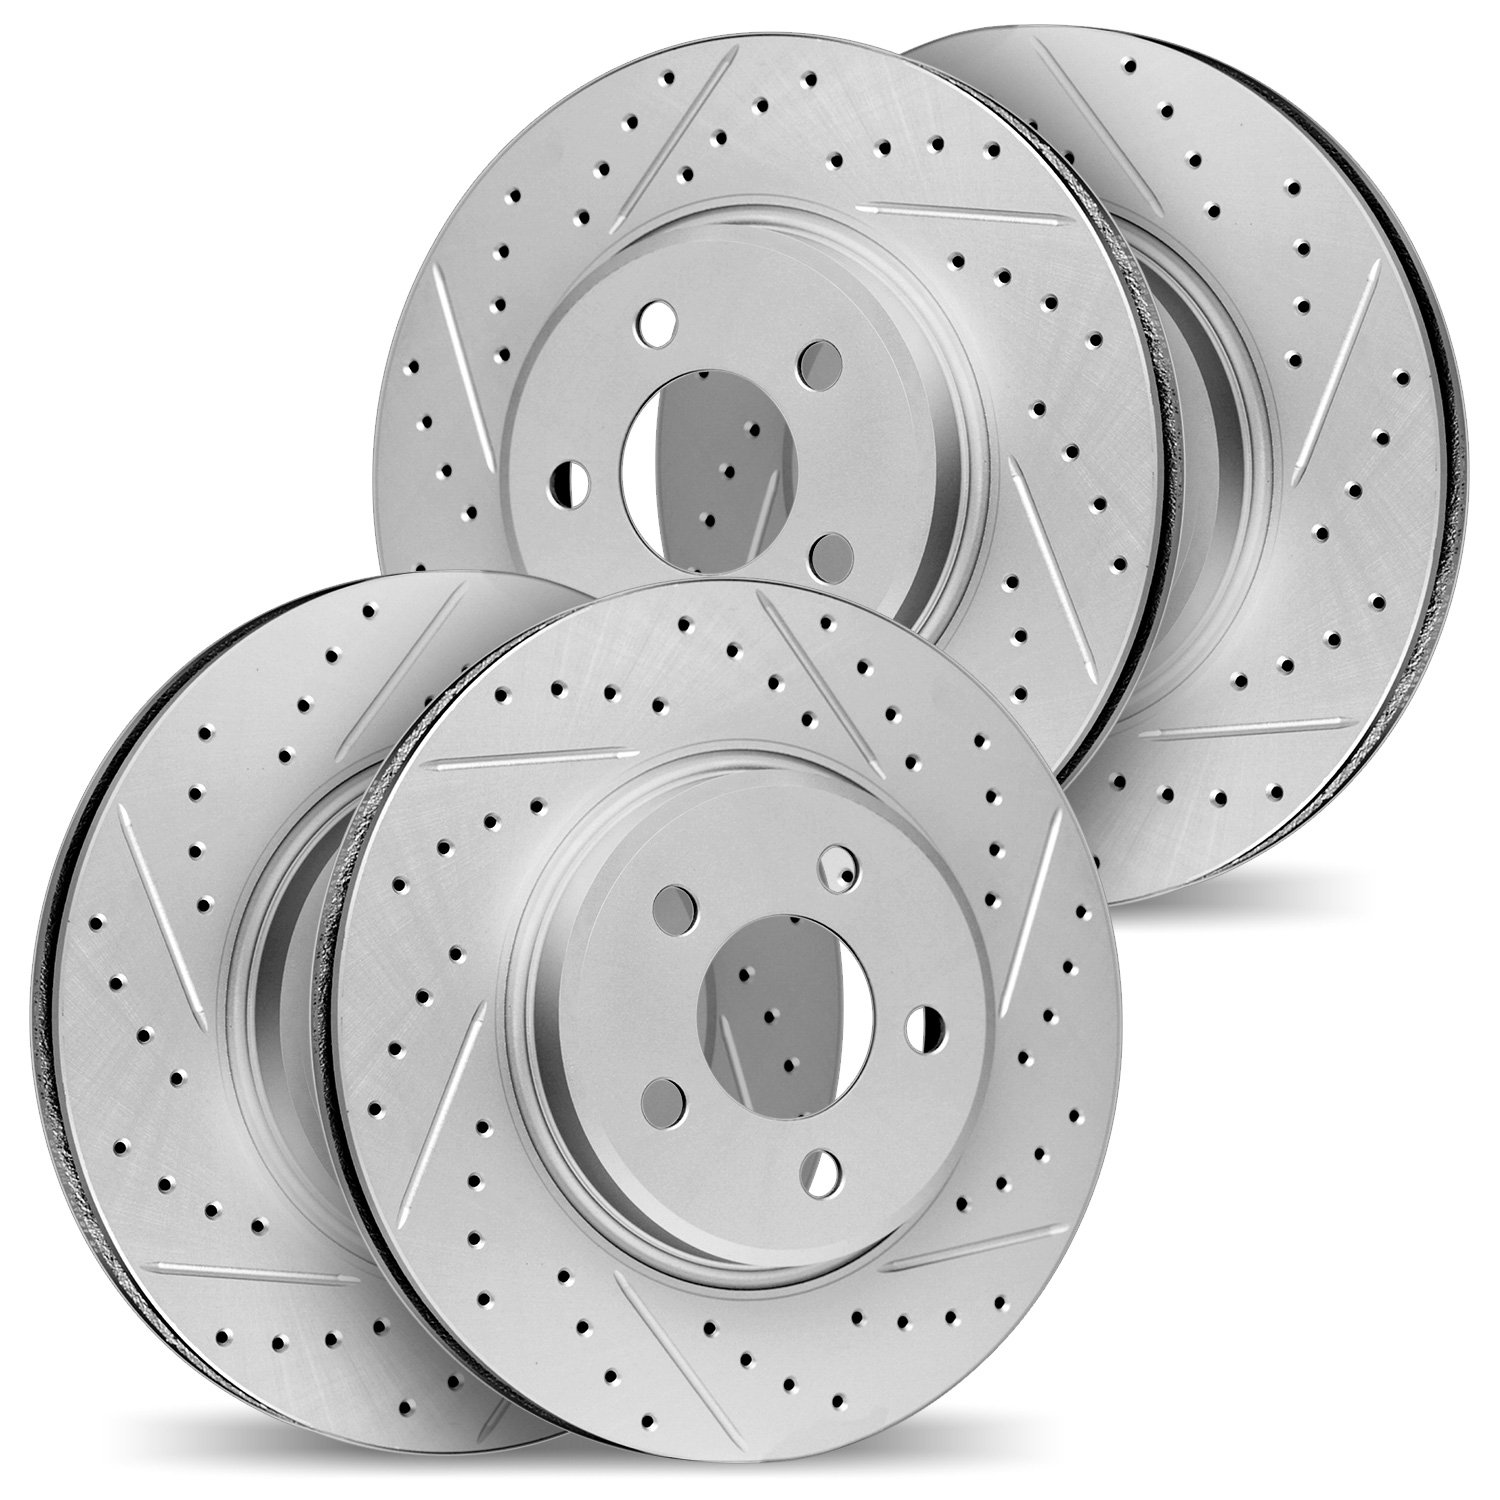 2004-72016 Geoperformance Drilled/Slotted Brake Rotors, 2006-2012 Mitsubishi, Position: Front and Rear